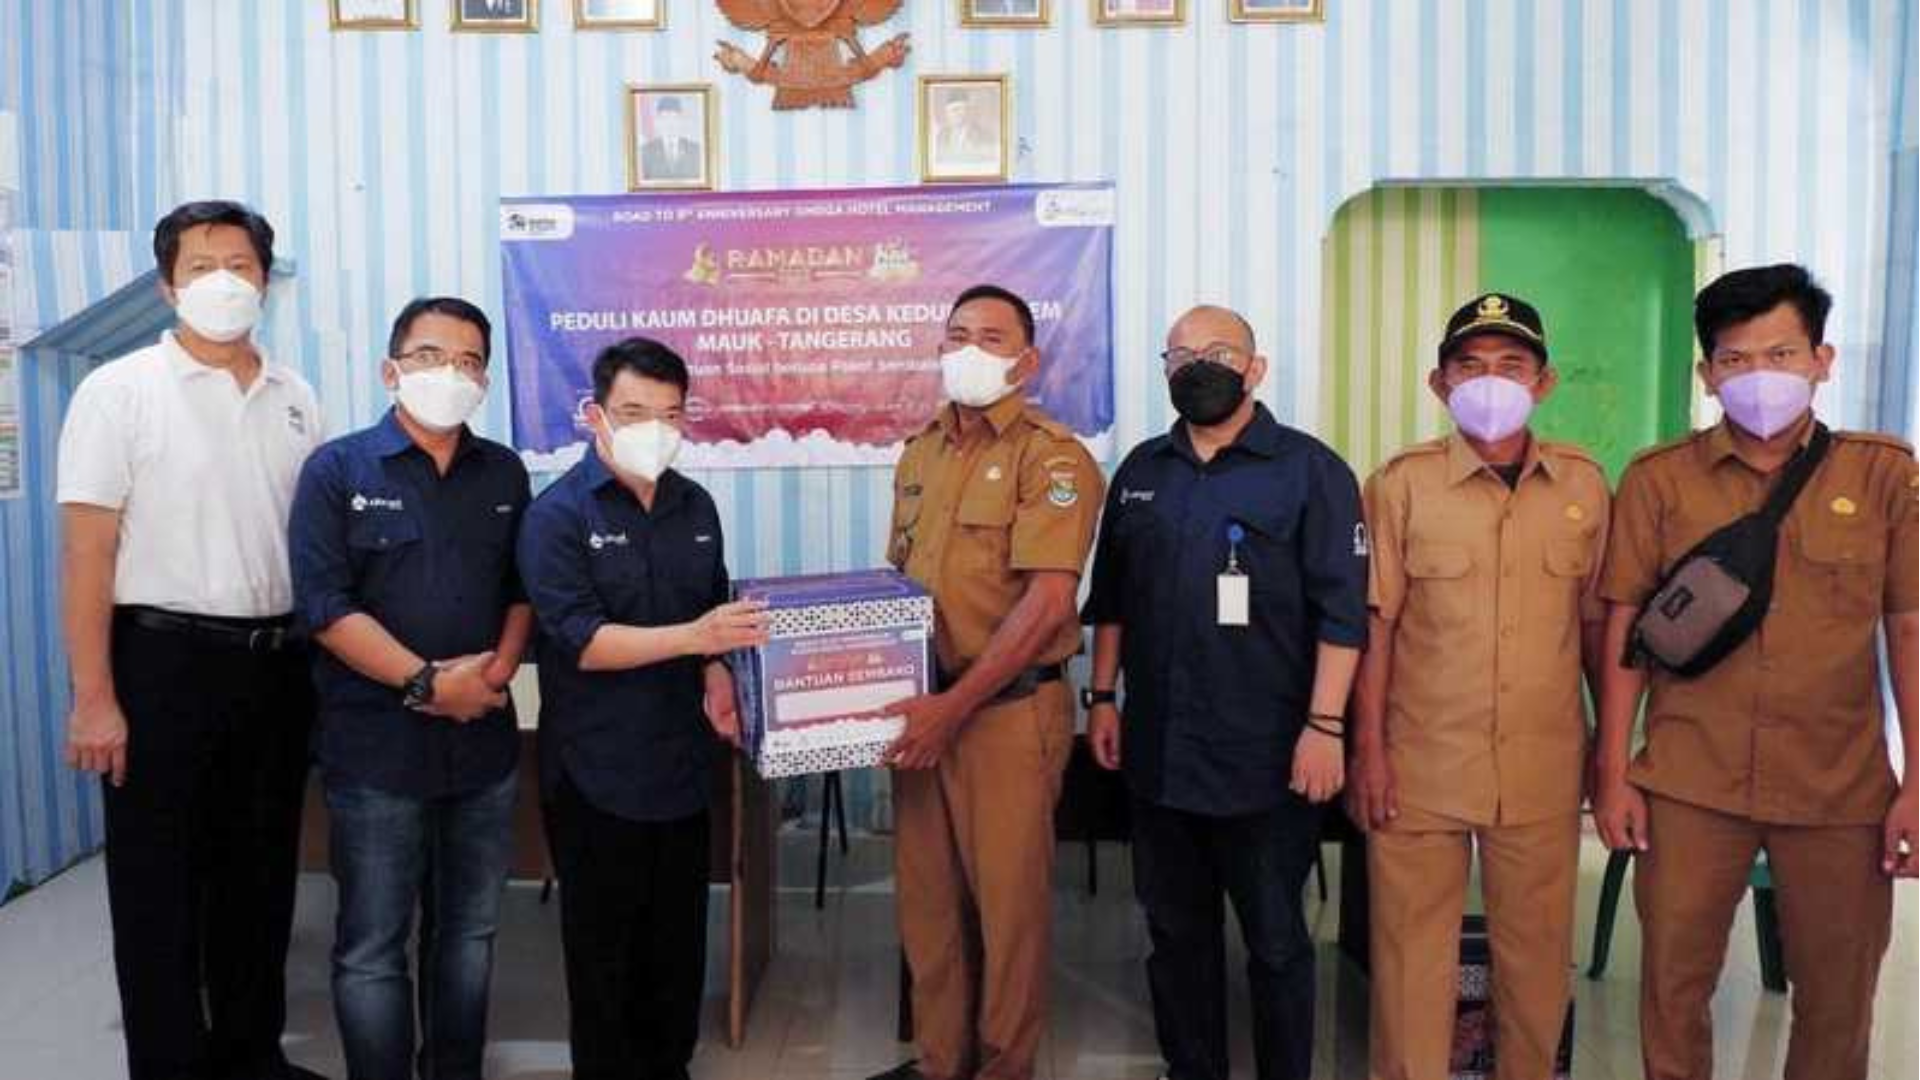 OHM Provides Basic Food Assistance for Tangerang Residents